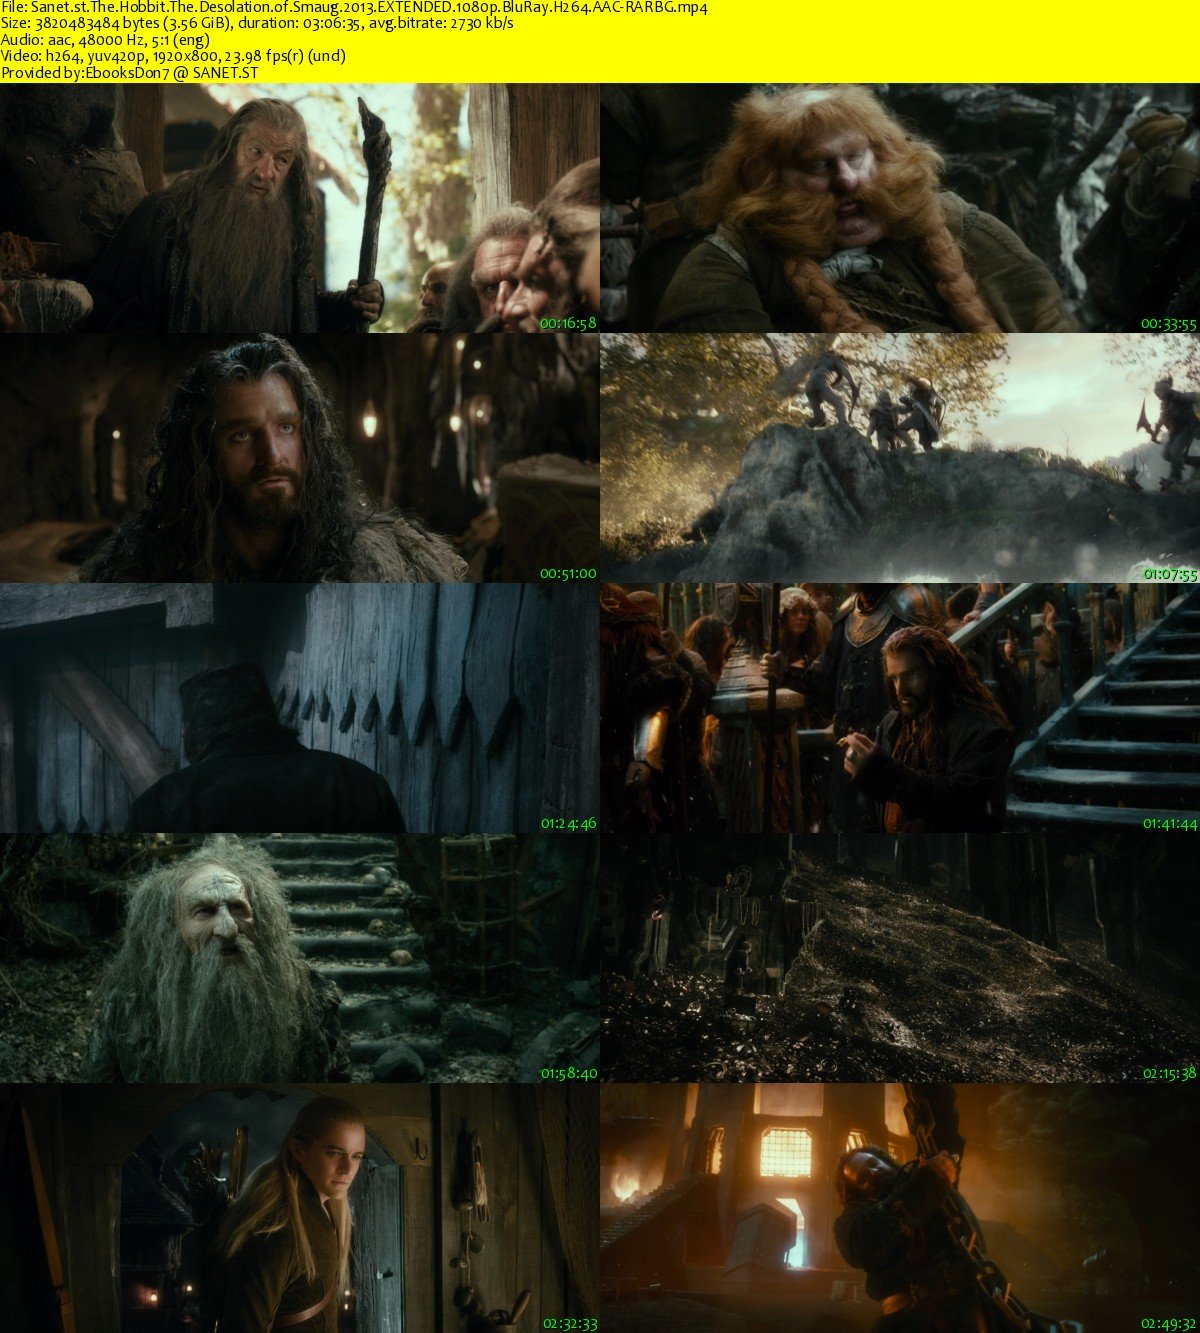 download the new for android The Hobbit: The Desolation of Smaug